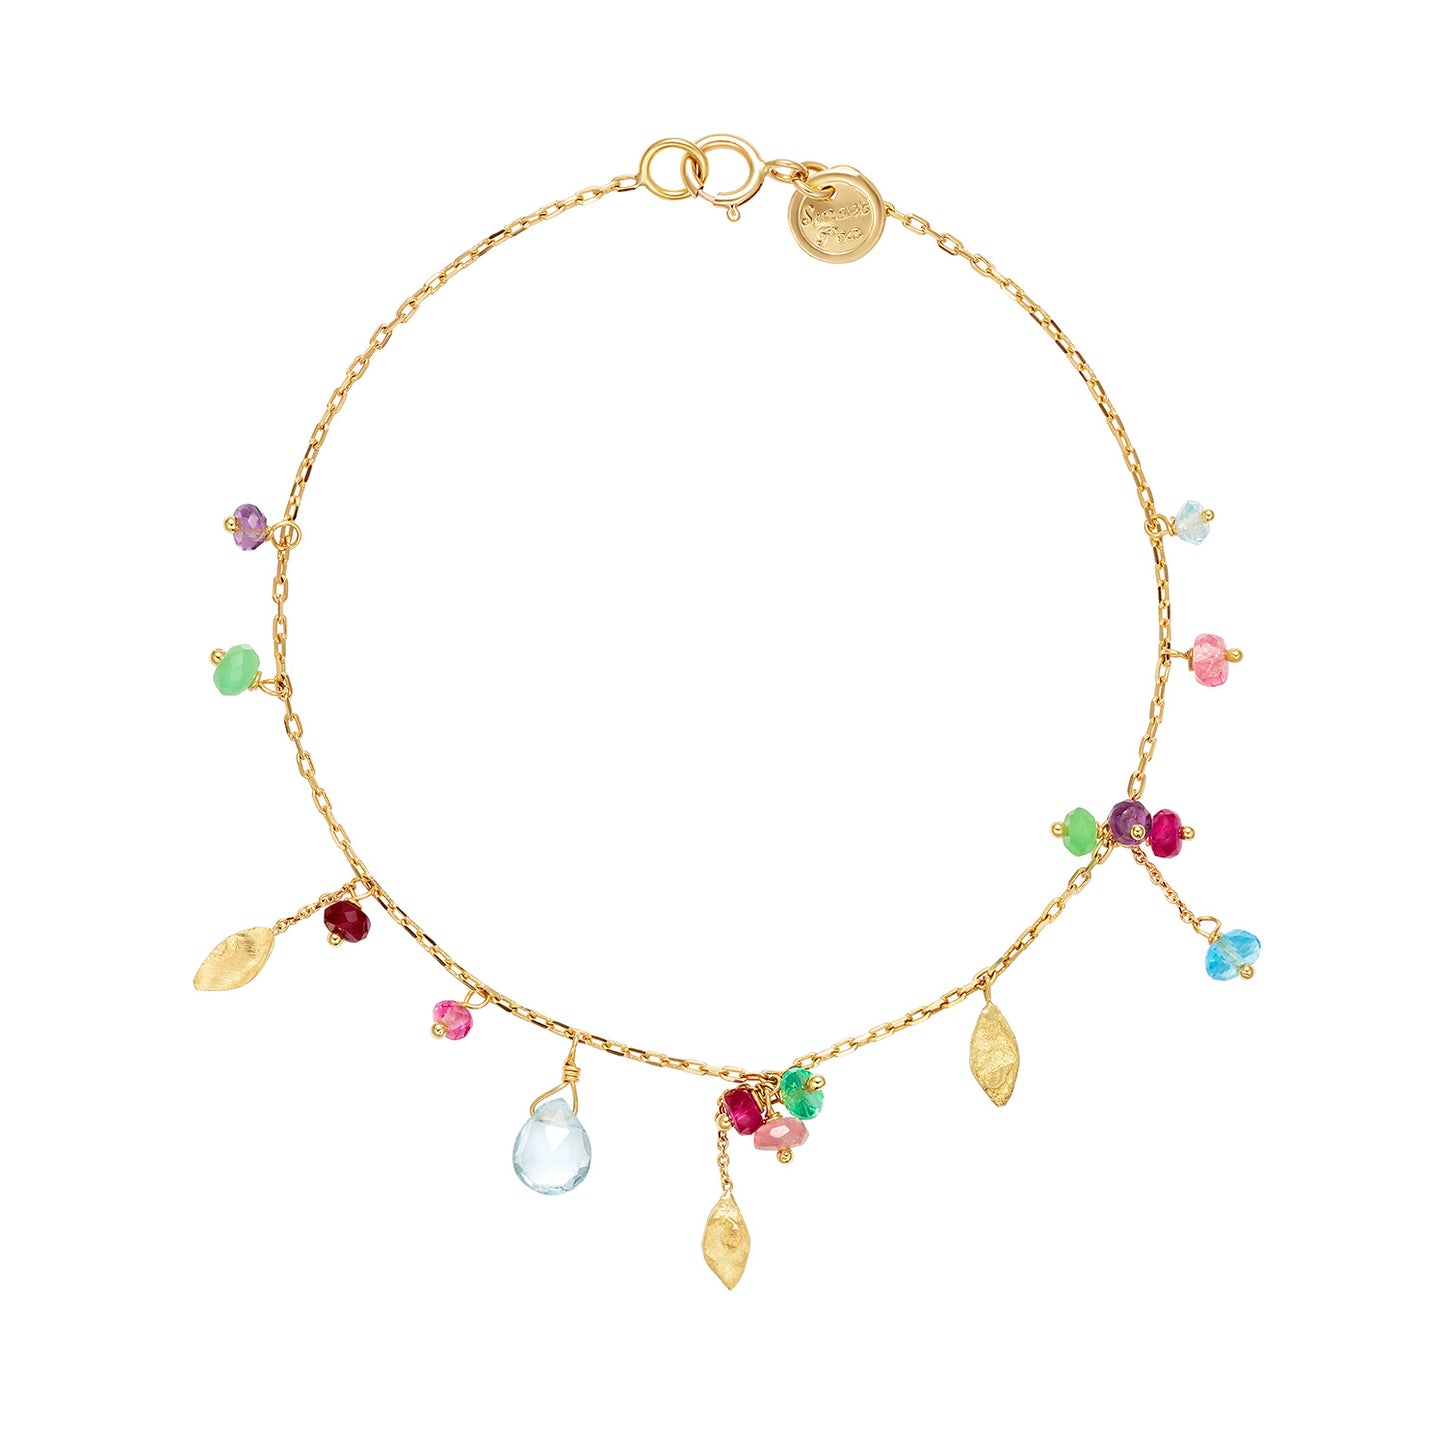 18ct Gold chain bracelet with mixed stones and three hanging gold leaves.